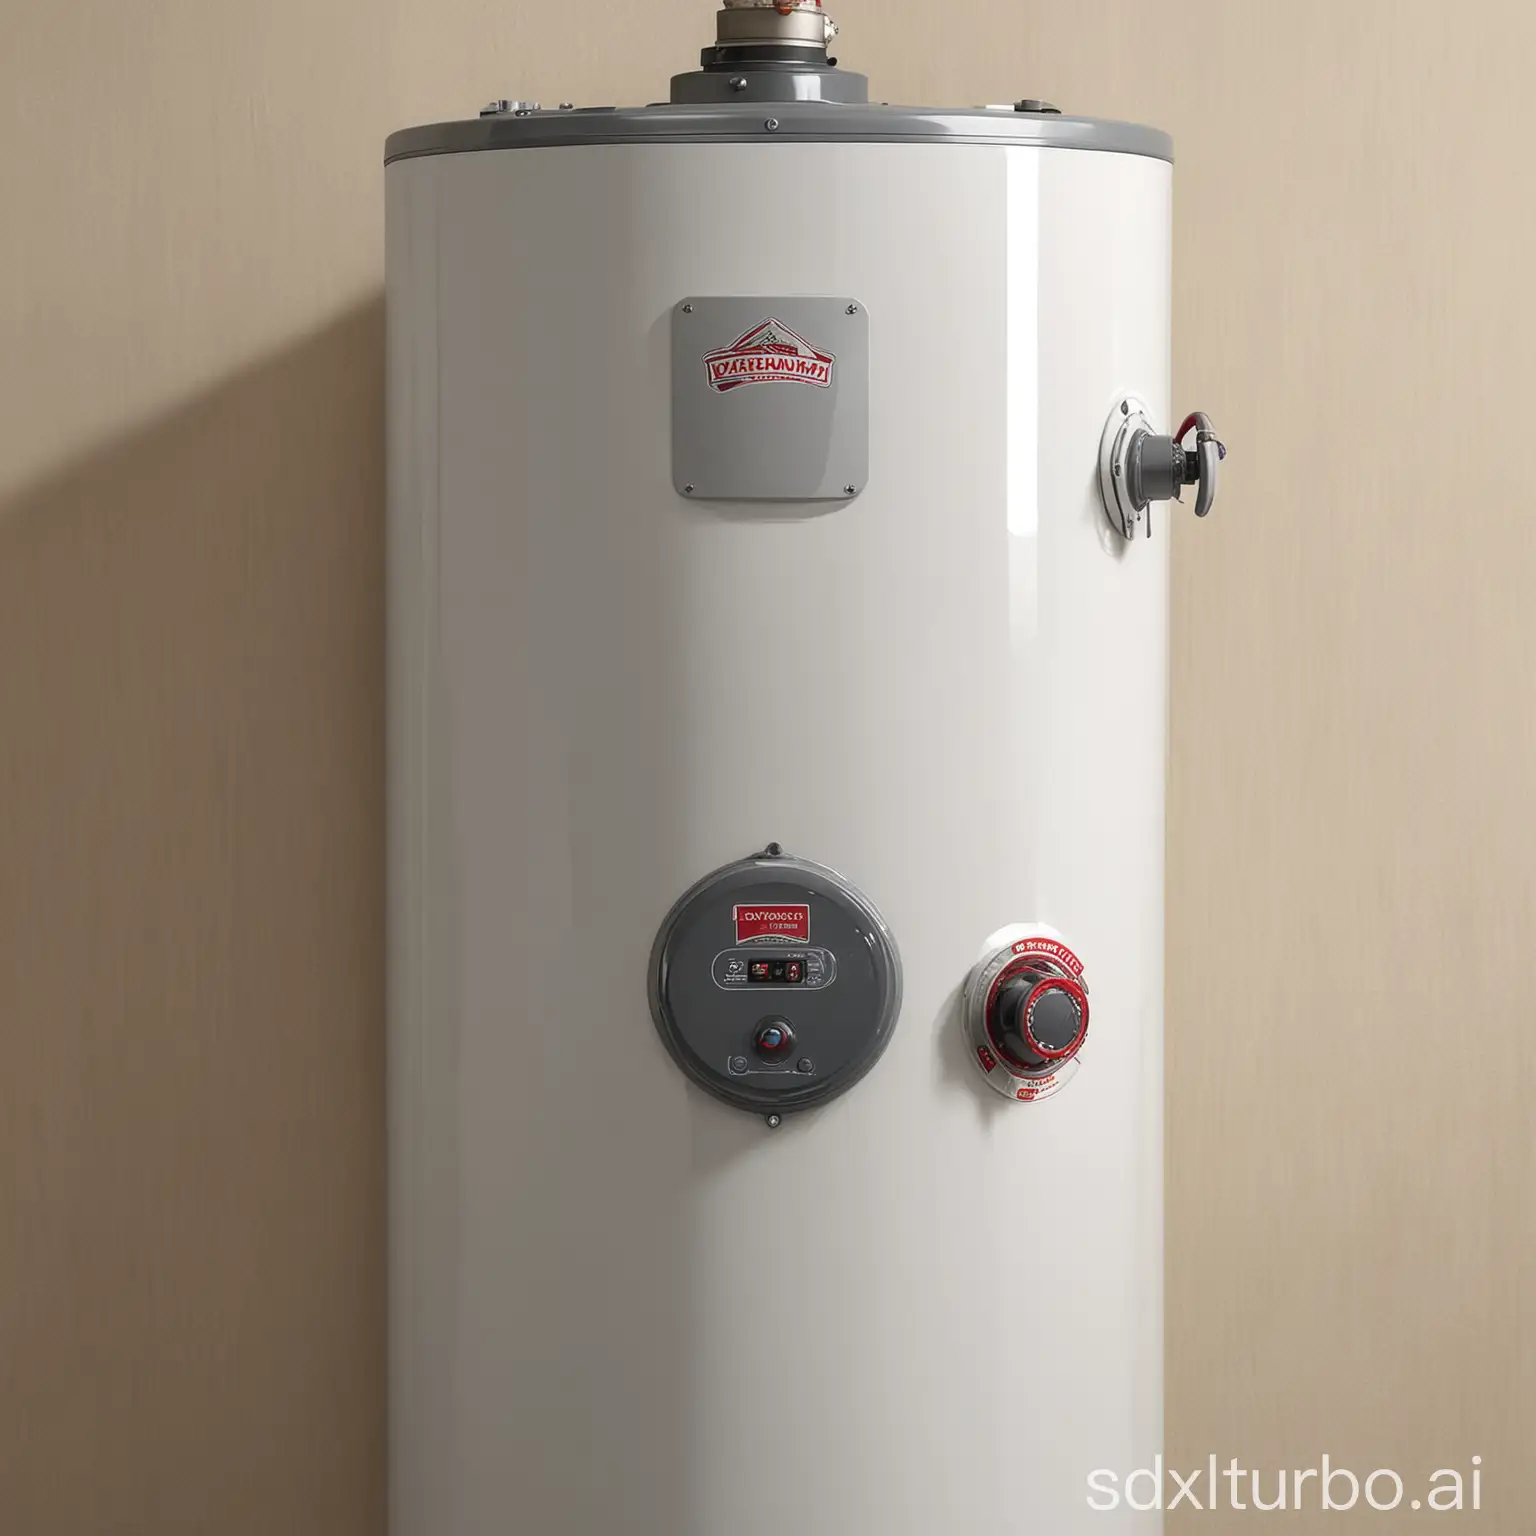 Modern-Electric-Water-Heater-with-Digital-Display